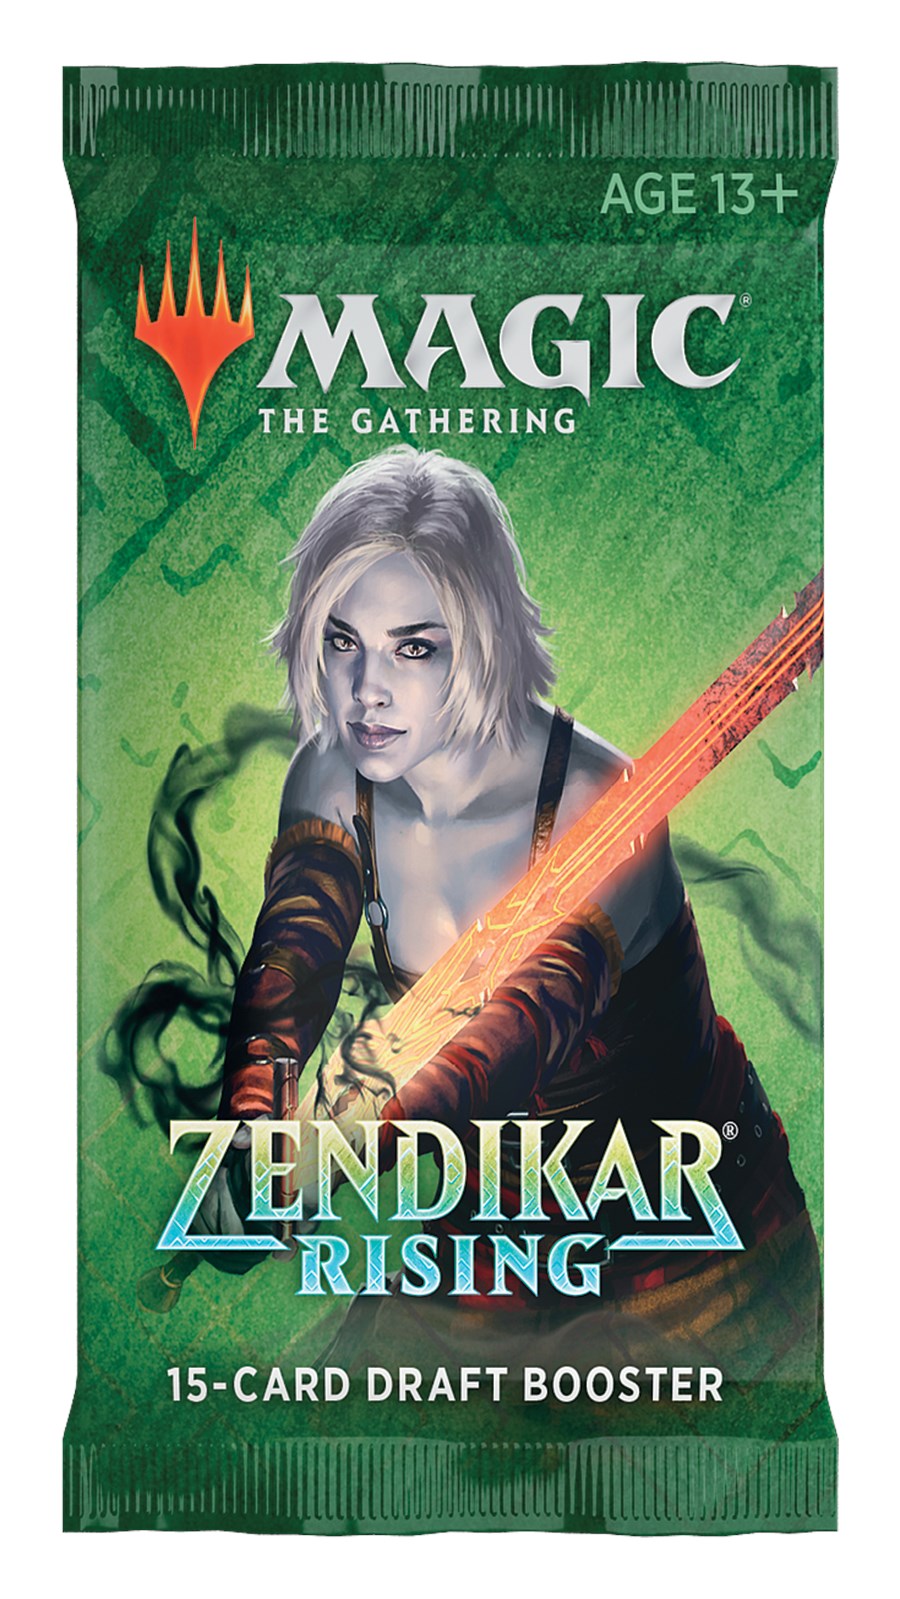 Wizards of the Coast Magic The Gathering Zendikar Rising Draft Cards C75380000 for sale online Booster Box 